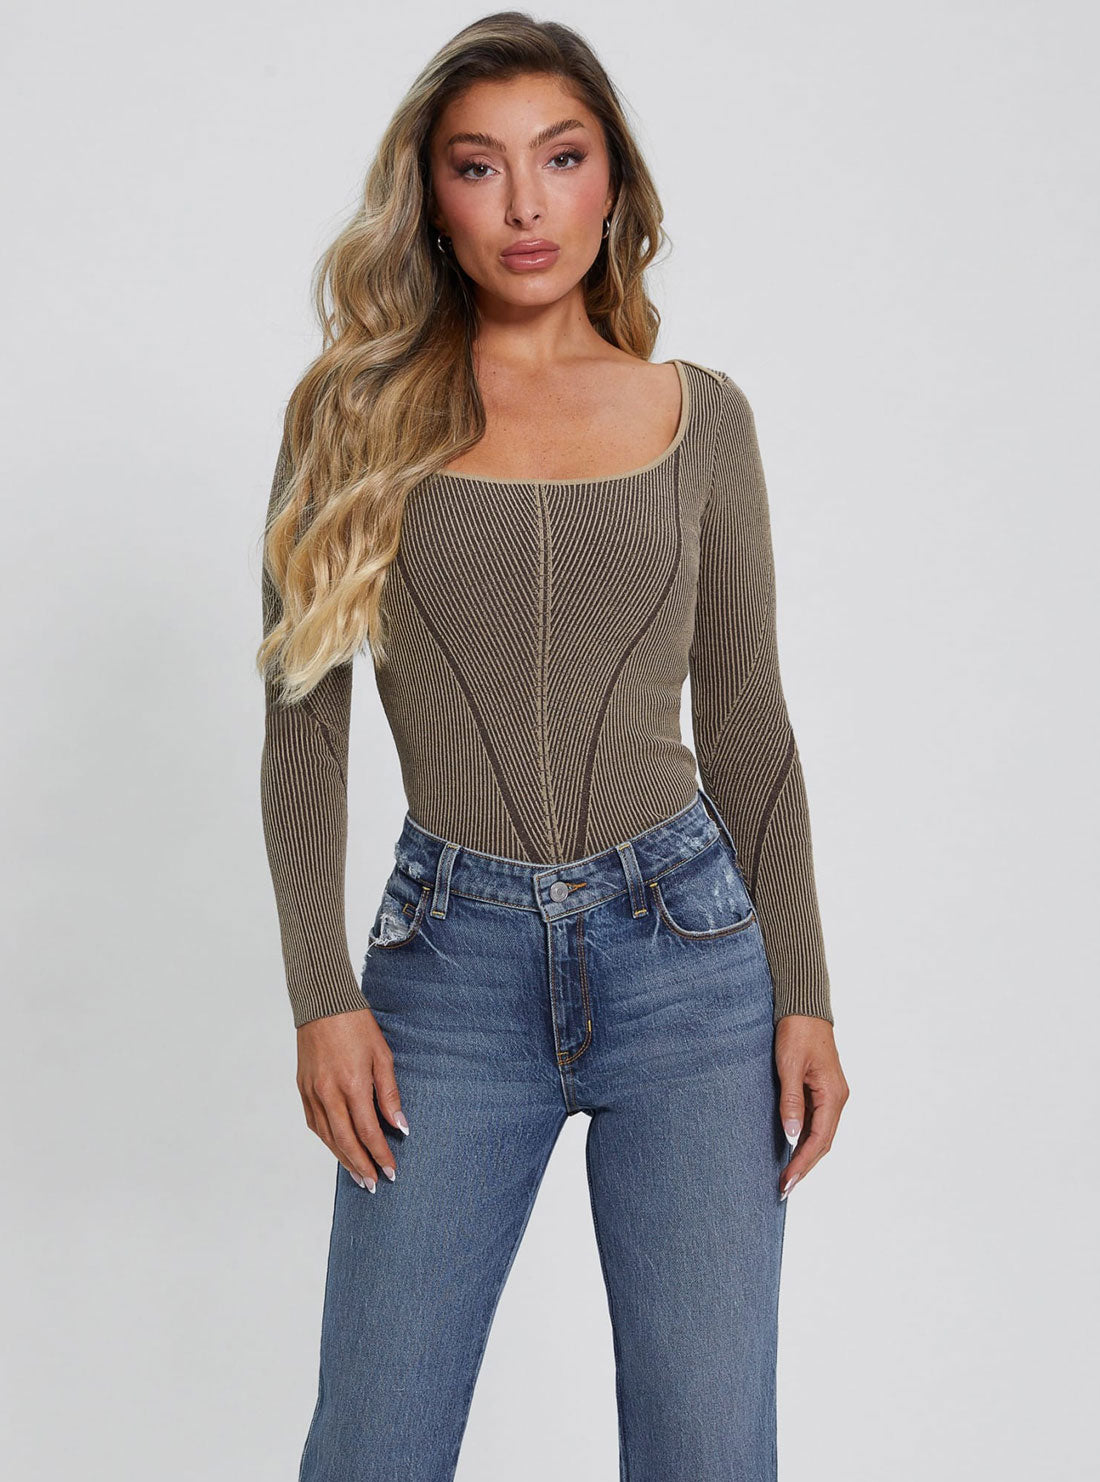 Eco Brown Blandine Knit Top | GUESS Women's Apparel | front view